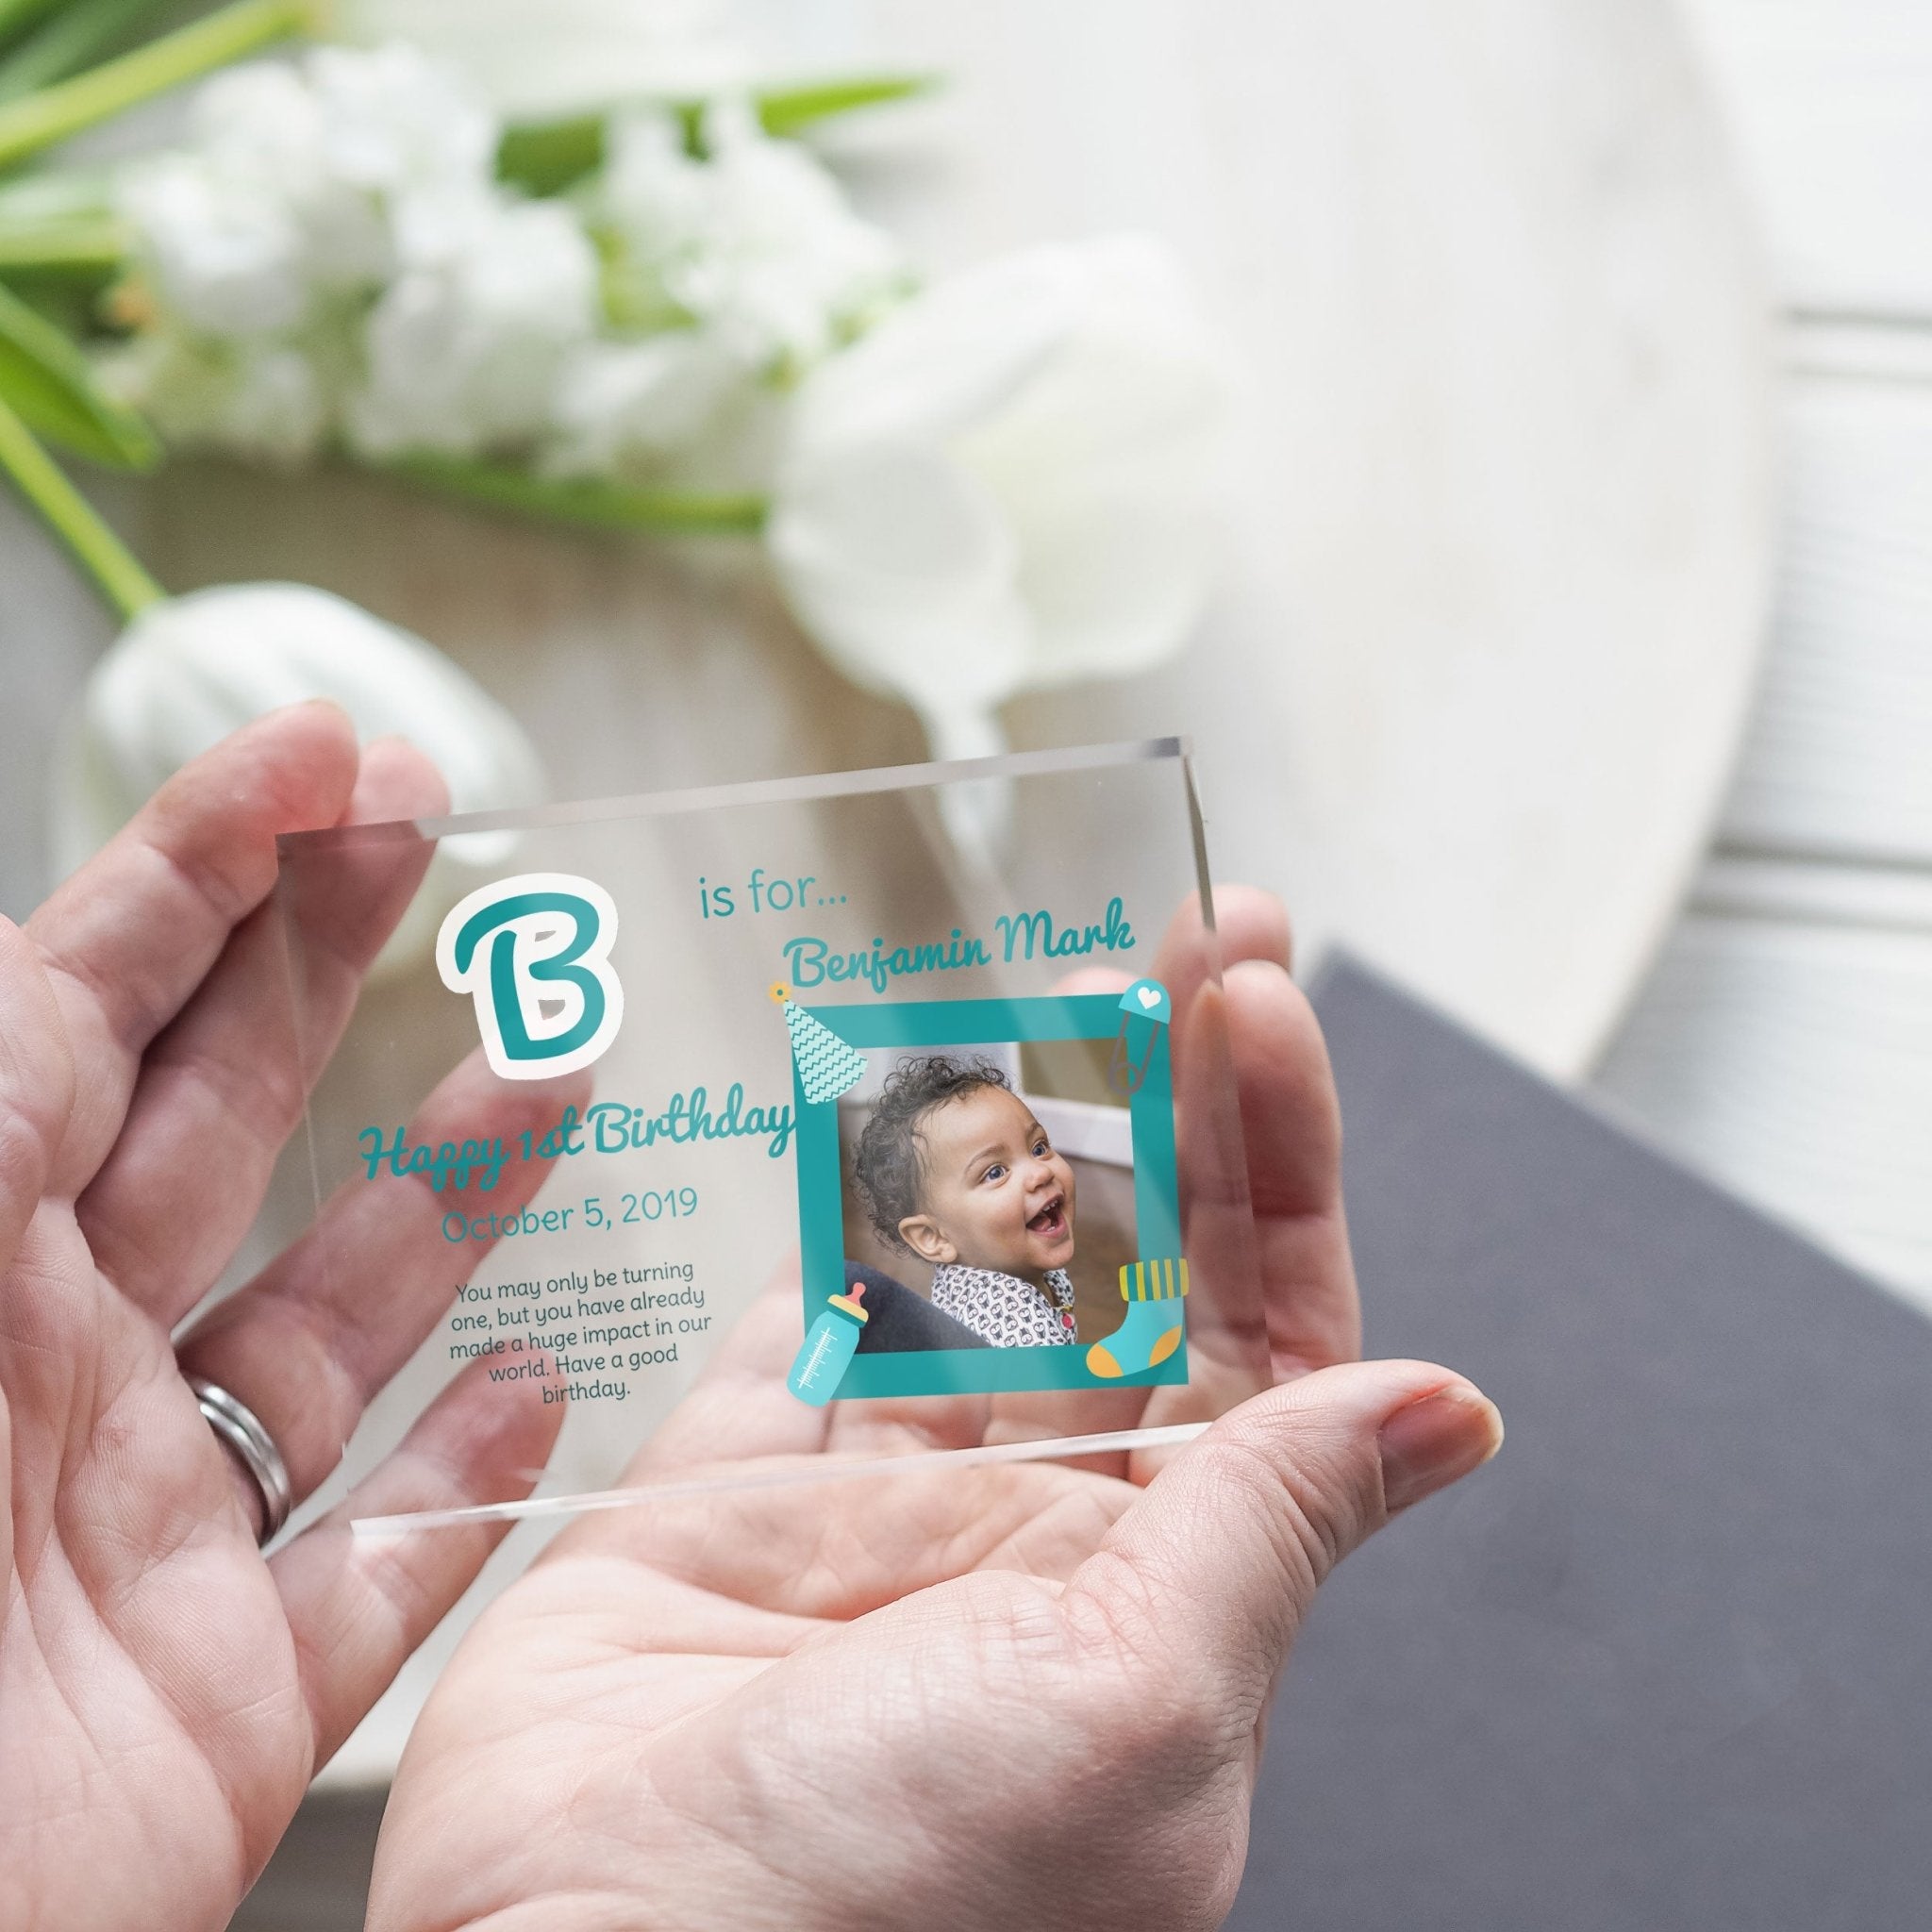 Baby Boy First Birthday Gift | 1st Birthday Present For Boy | 1st Birthday Picture Frame | Personalized Gift For Baby Boy PhotoBlock - Unique Prints